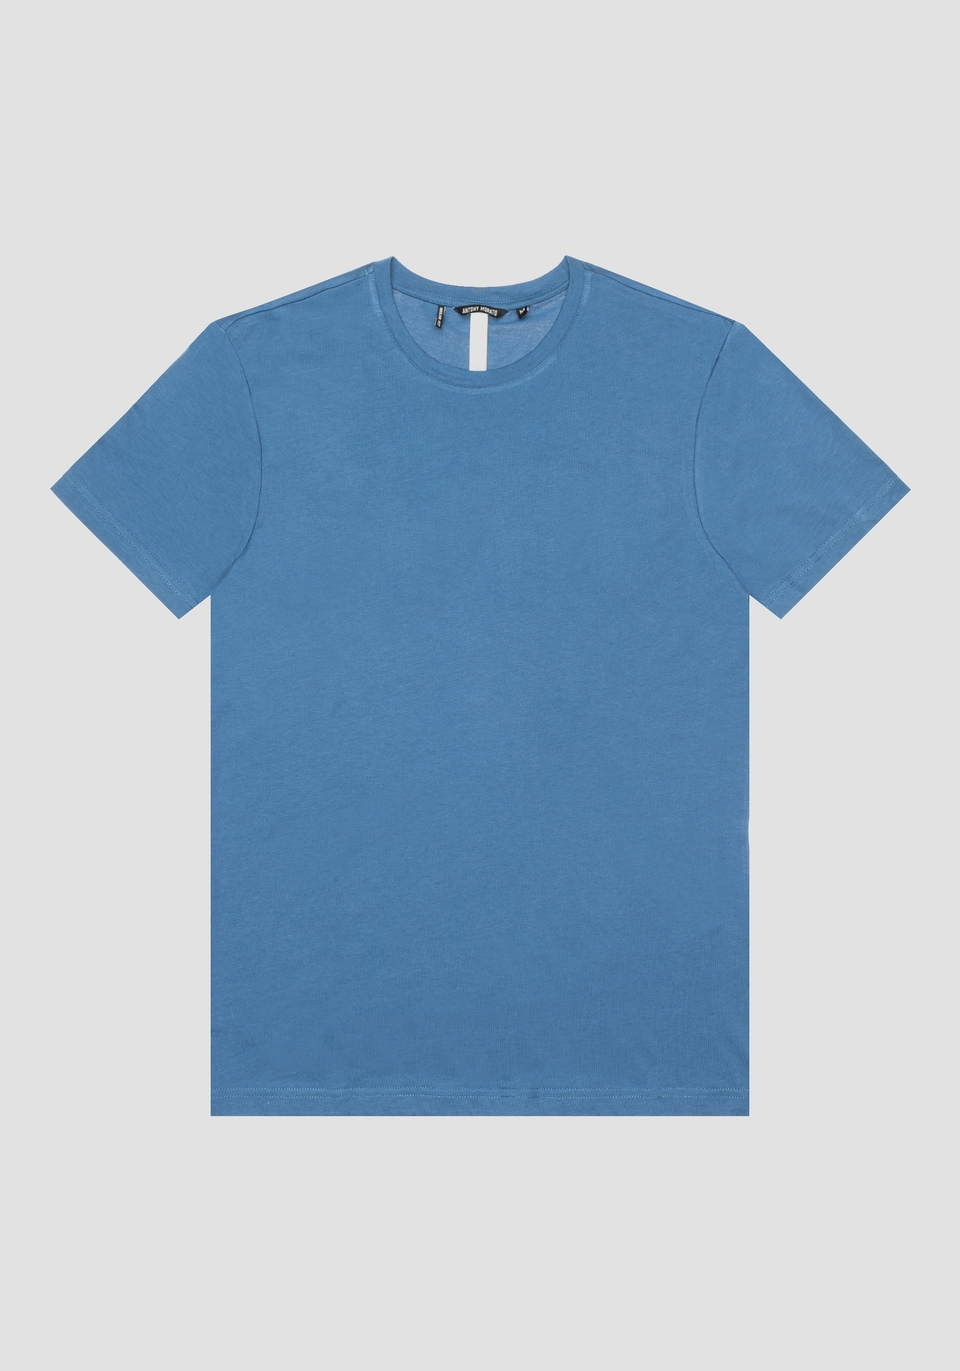 REGULAR FIT T-SHIRT IN A SUSTAINABLE COTTON BLEND - Antony Morato Online Shop